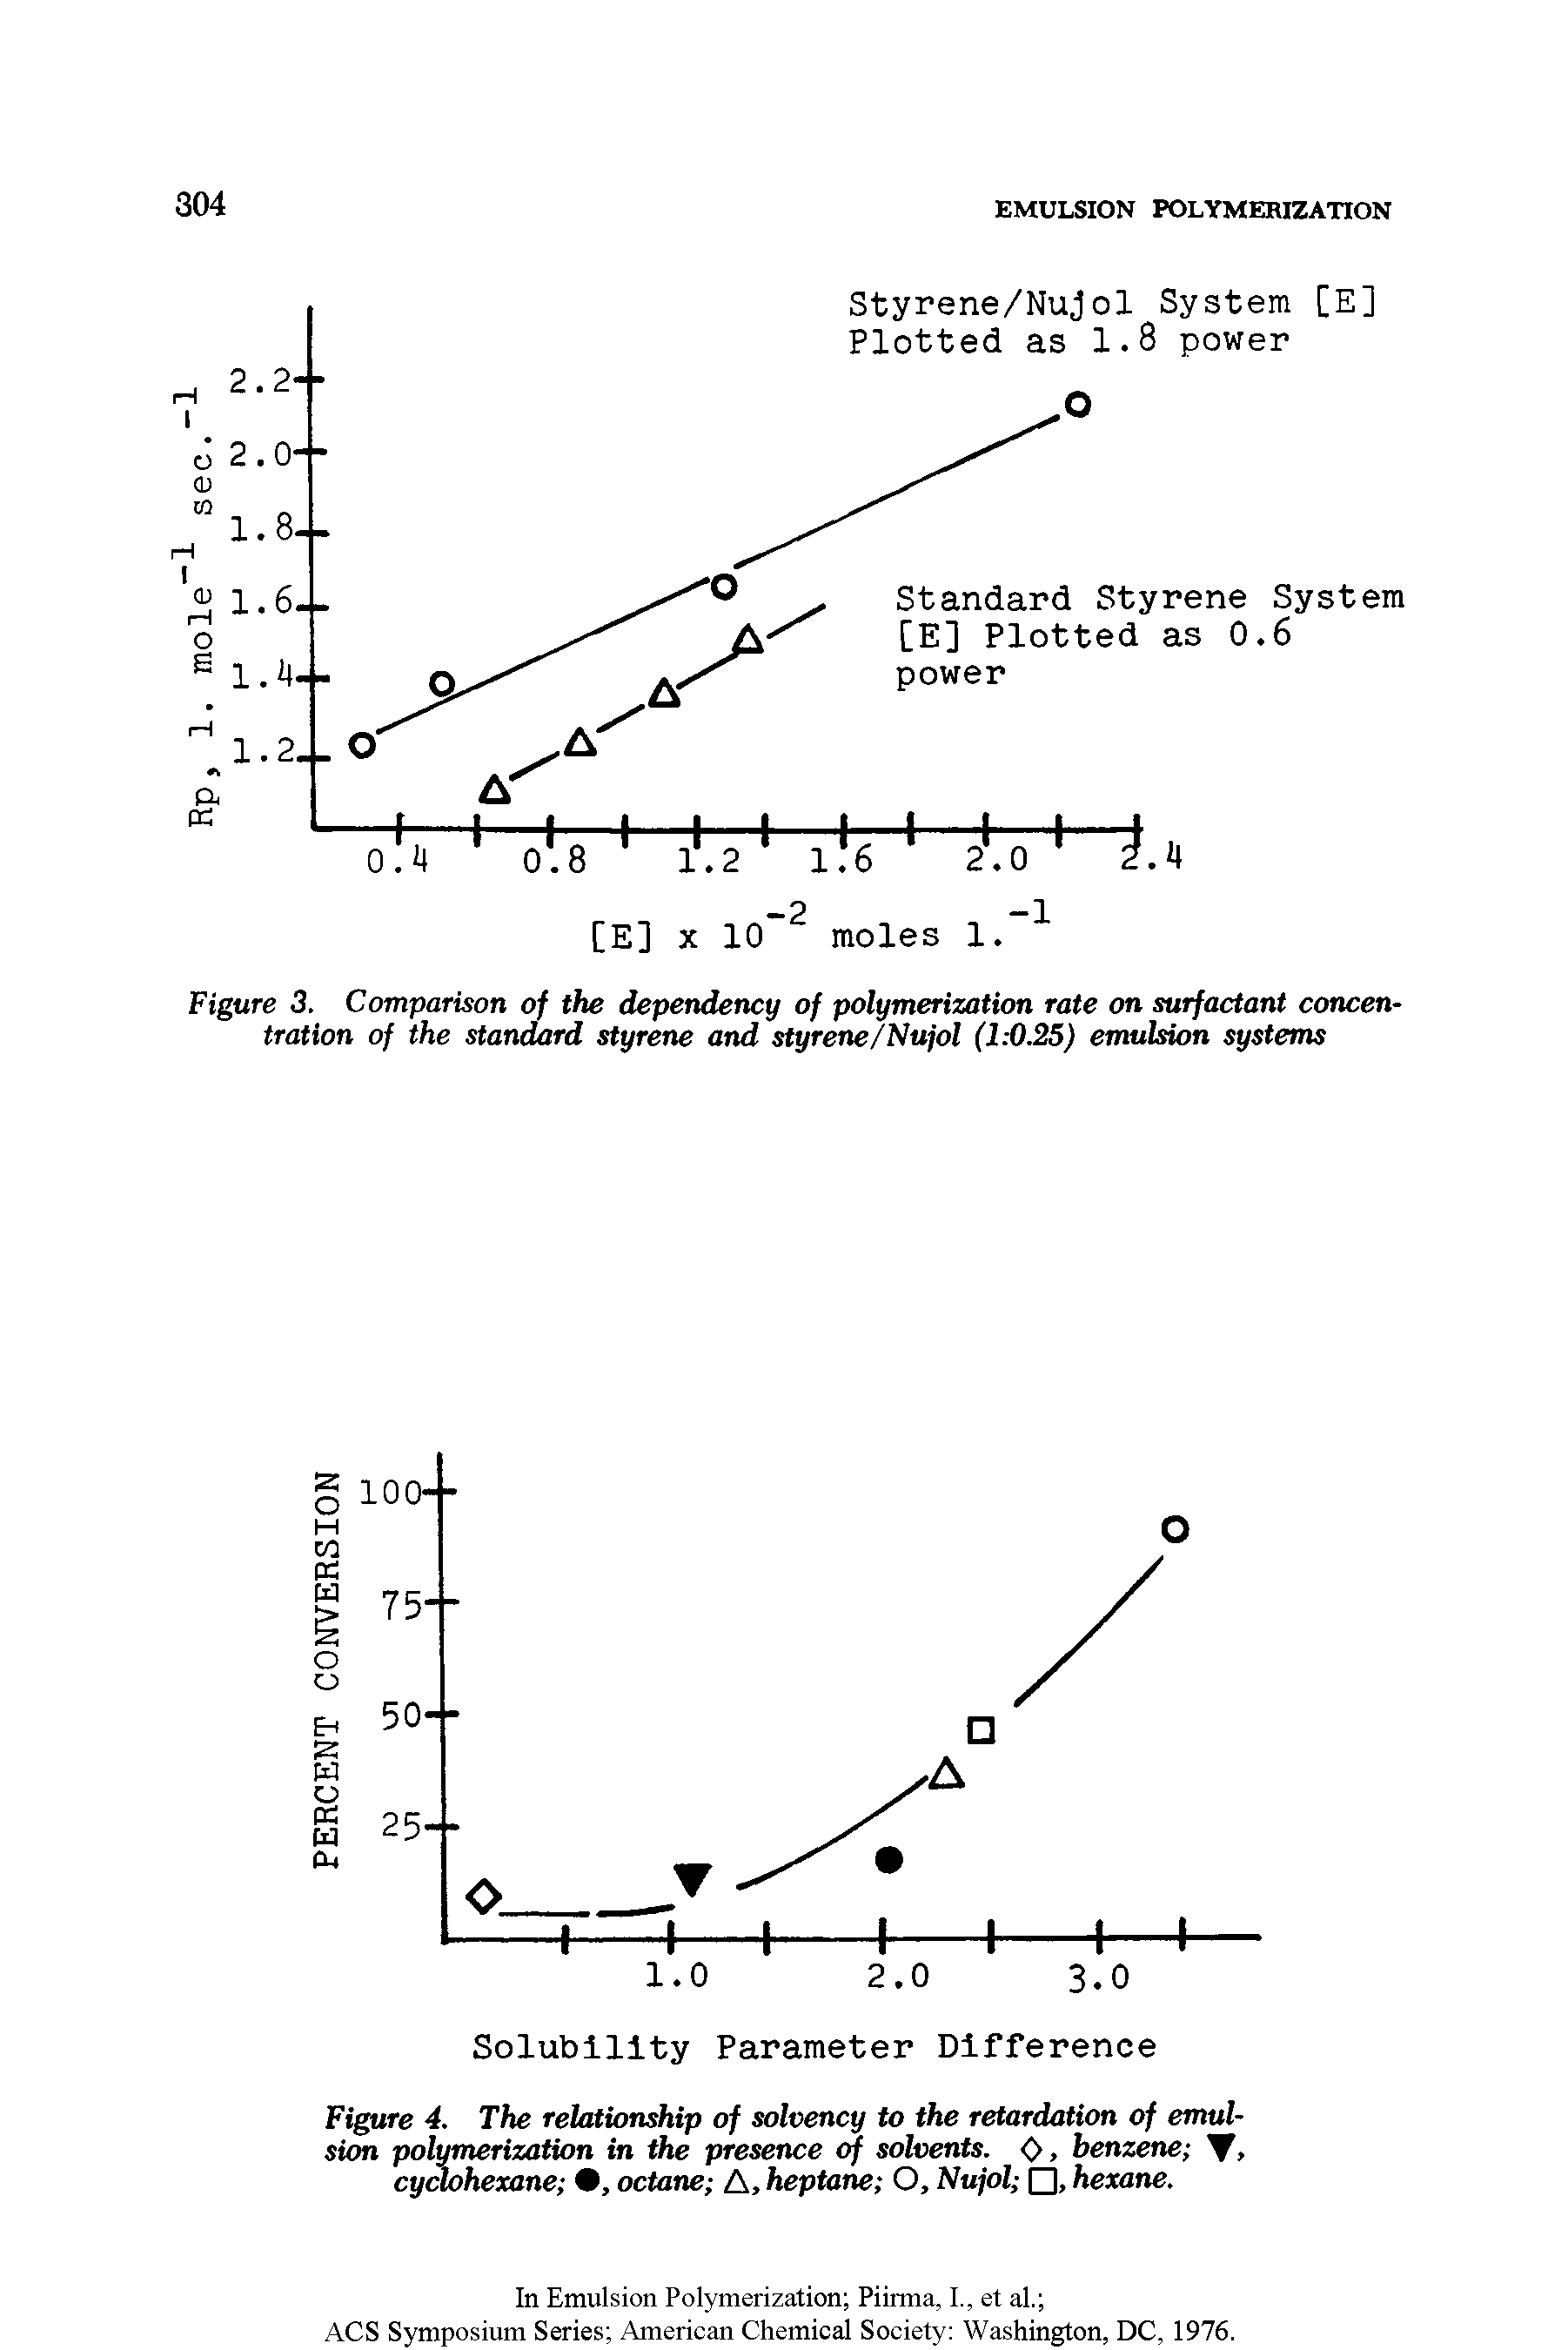 Figure 3. Comparison of the dependency of polymerization rate on surfactant concentration of the standard styrene and styrene/Nujol (1 0.25) emulsion systems...